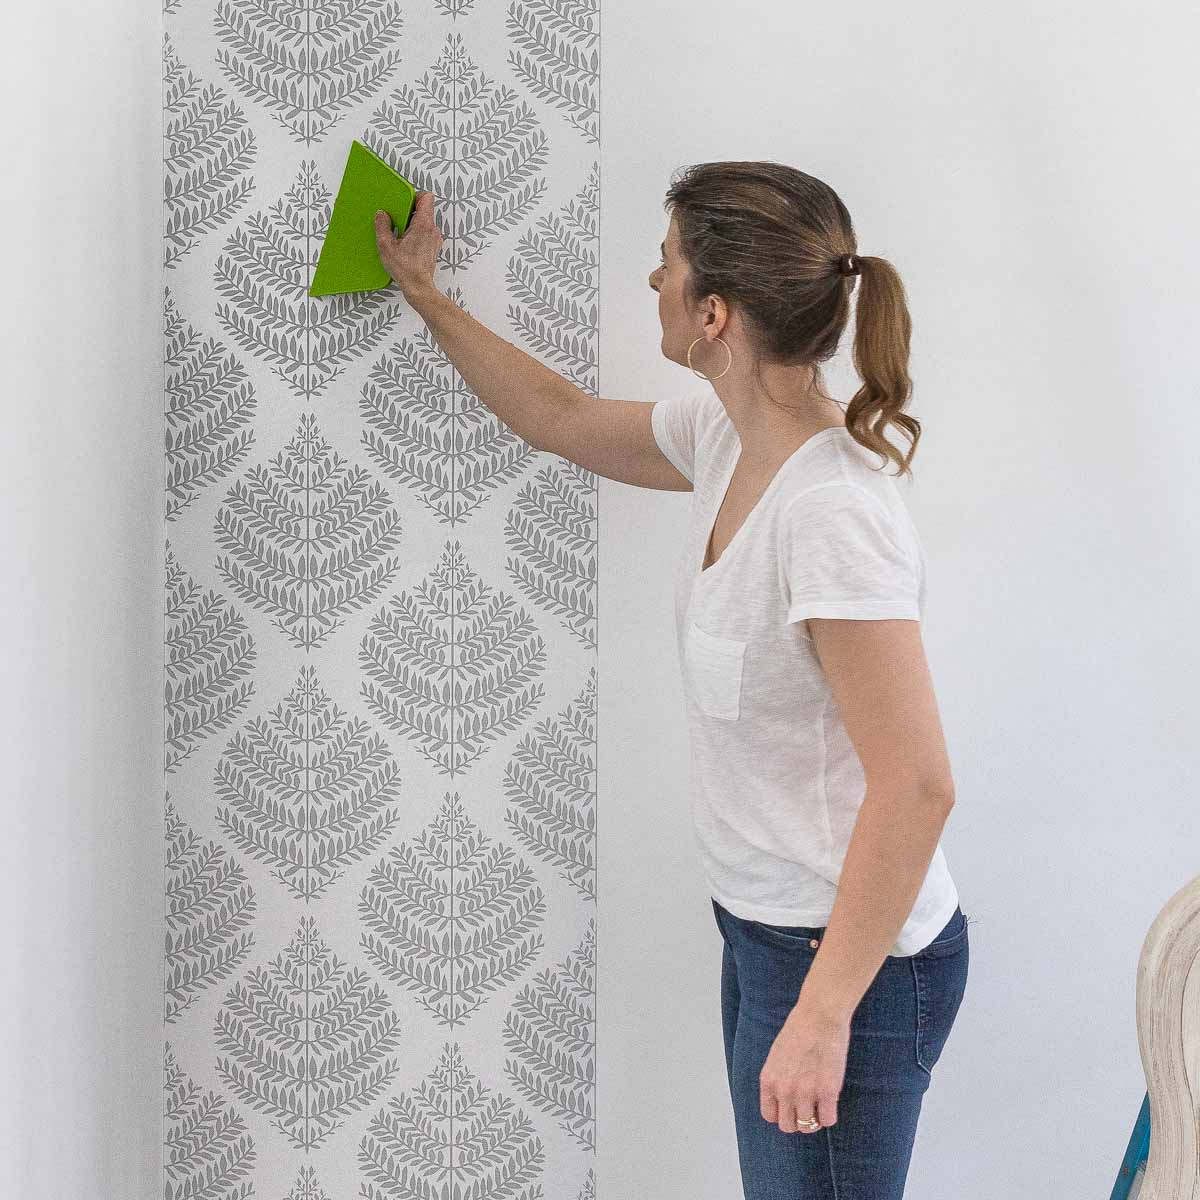 How to Repair Curled Wallpaper - YouTube